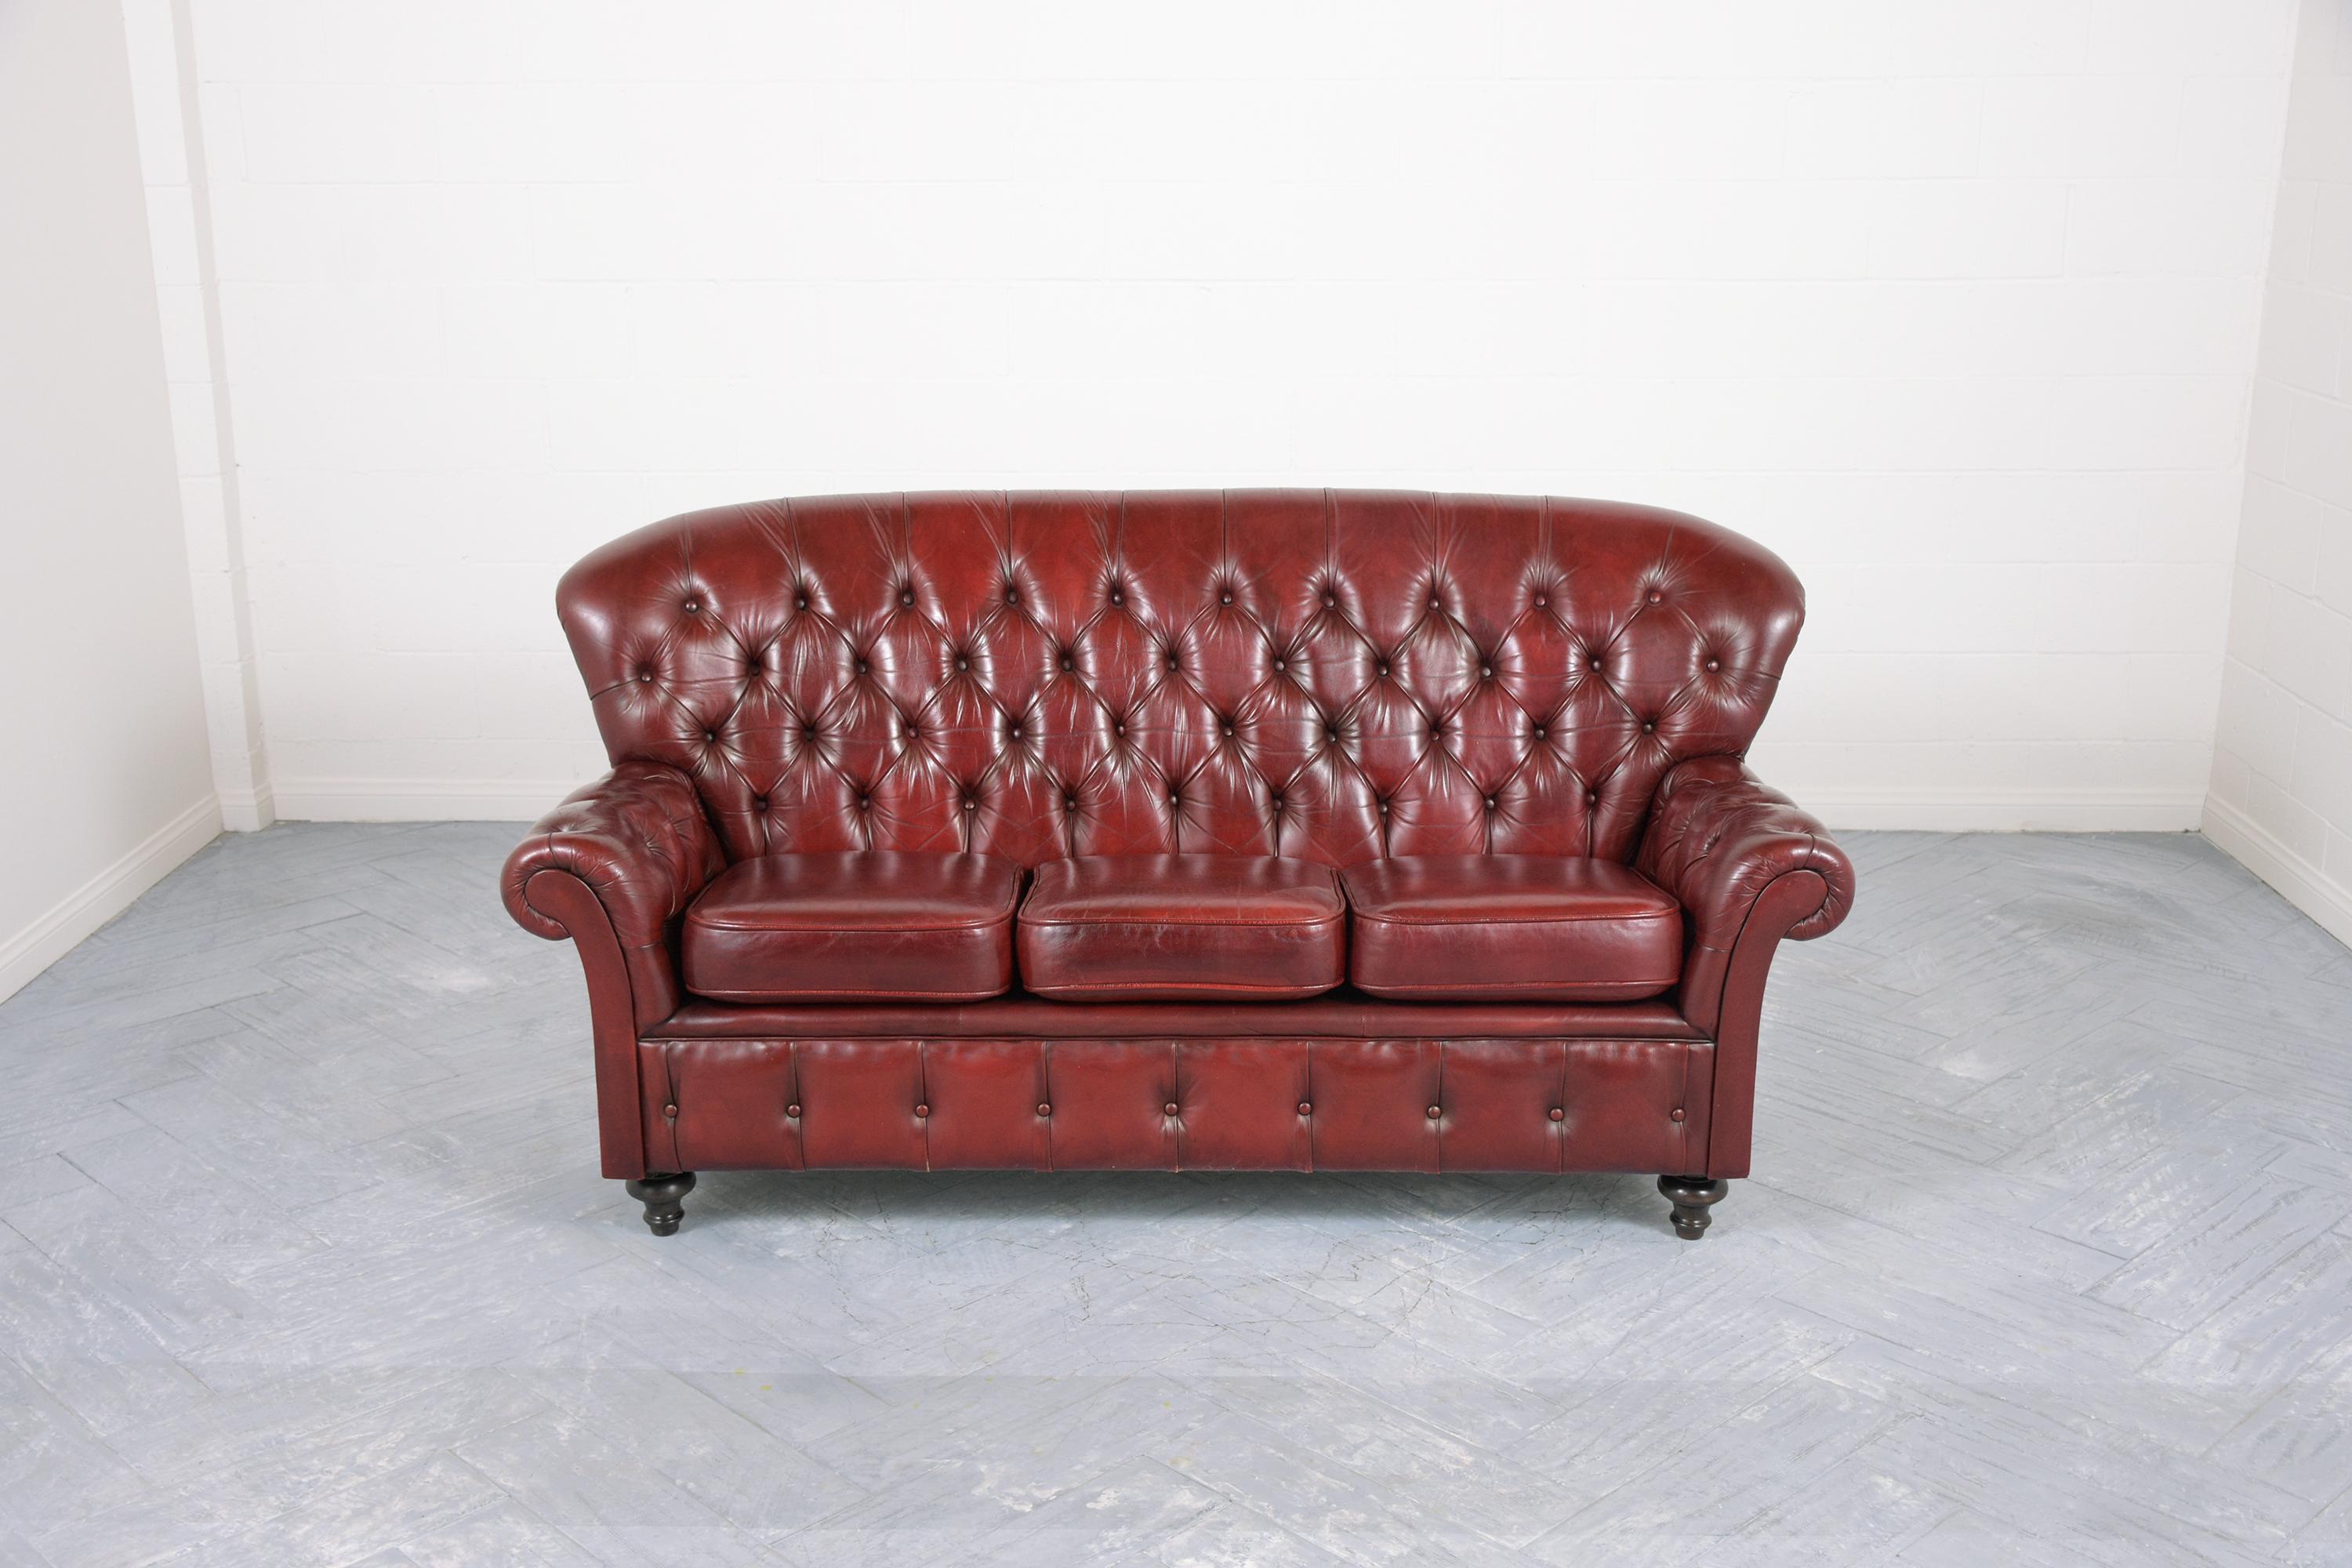 An extraordinary vintage leather tufted chesterfield sofa in good condition beautiful crafted out of wood and leather combination newly restored by our professional craftsmen team. This piece features high backrest scrolling arms with a tufted